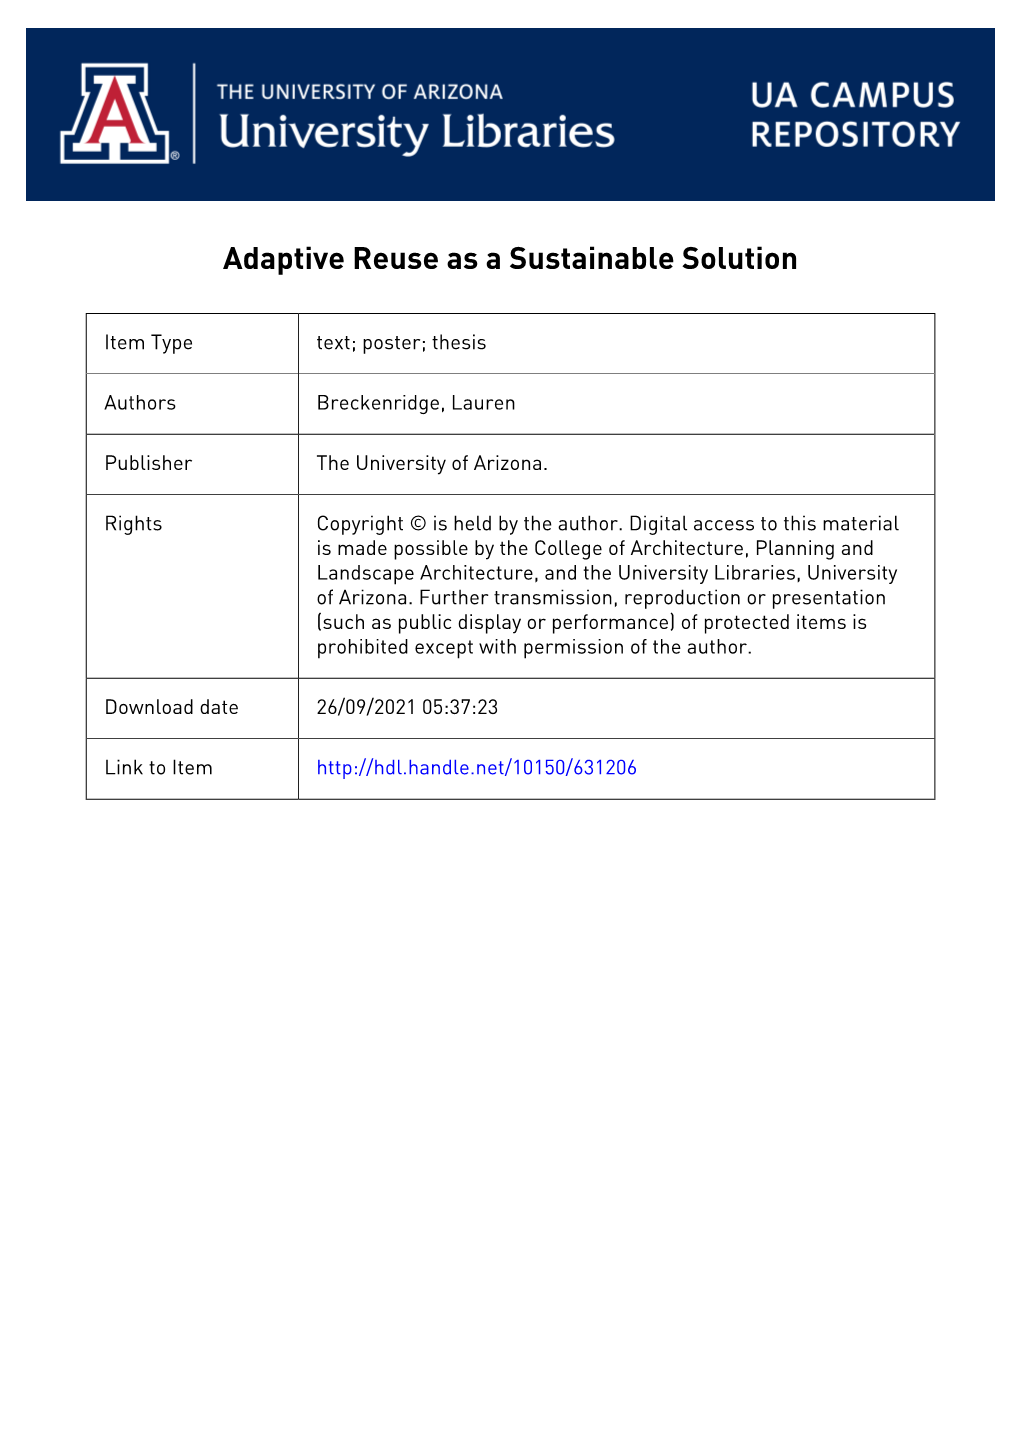 Adaptive Reuse As a Sustainable Solution